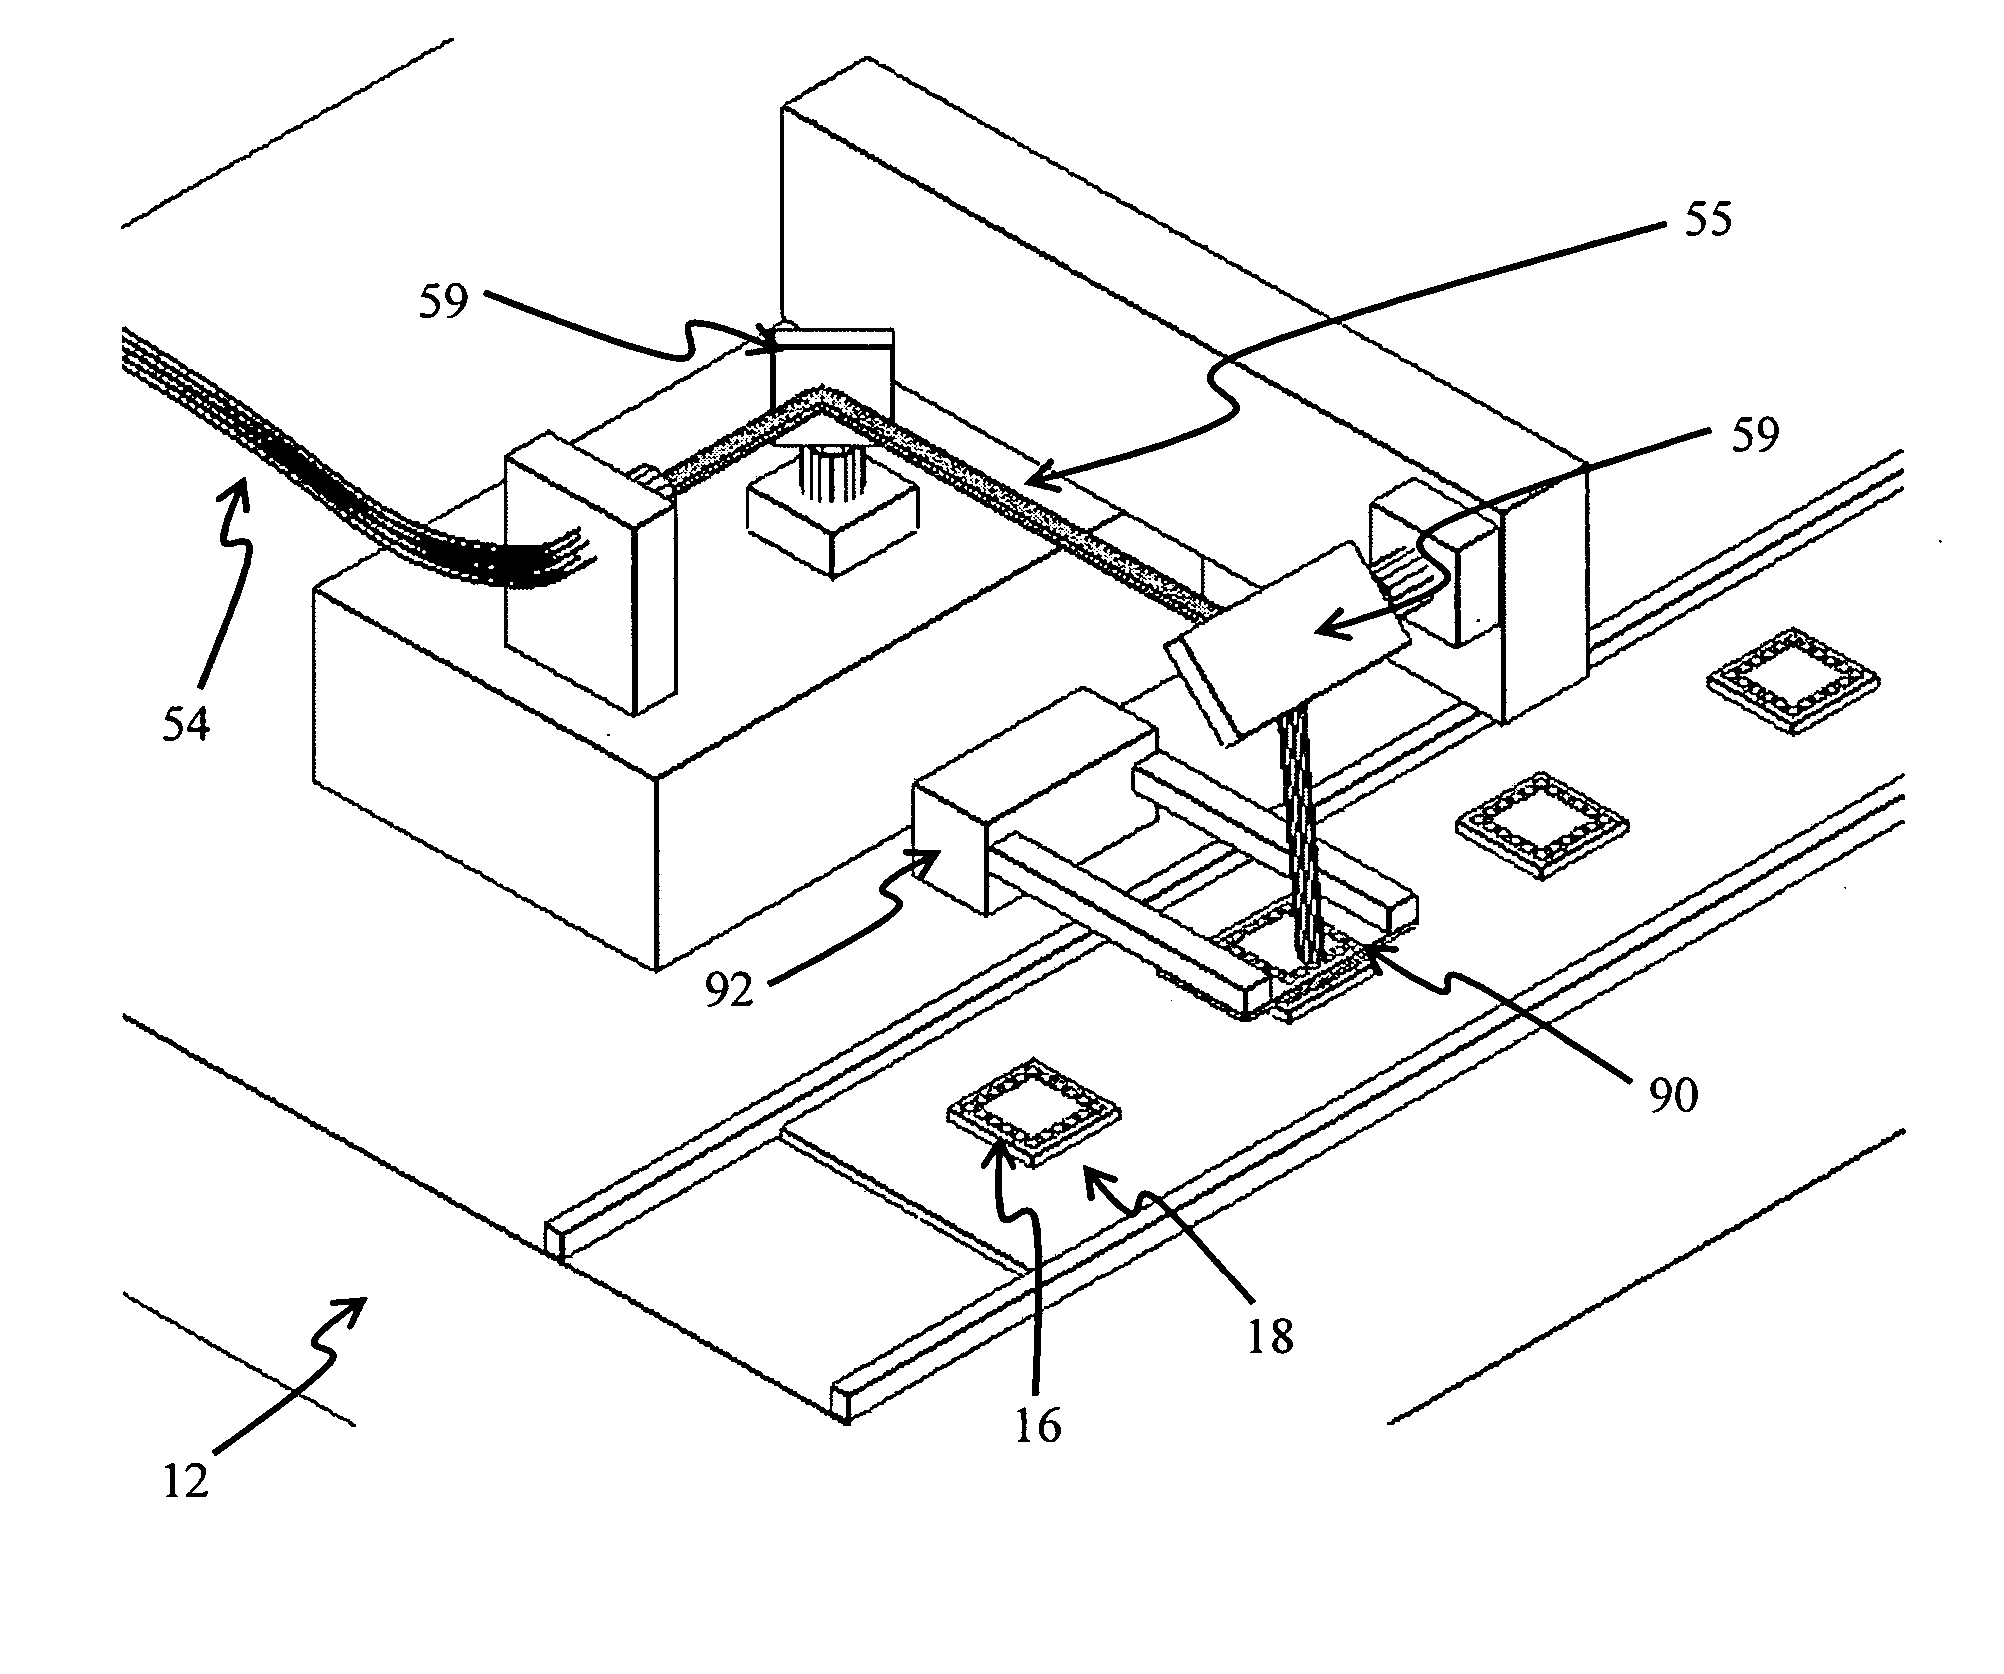 Laser cleaning system for a wire bonding machine